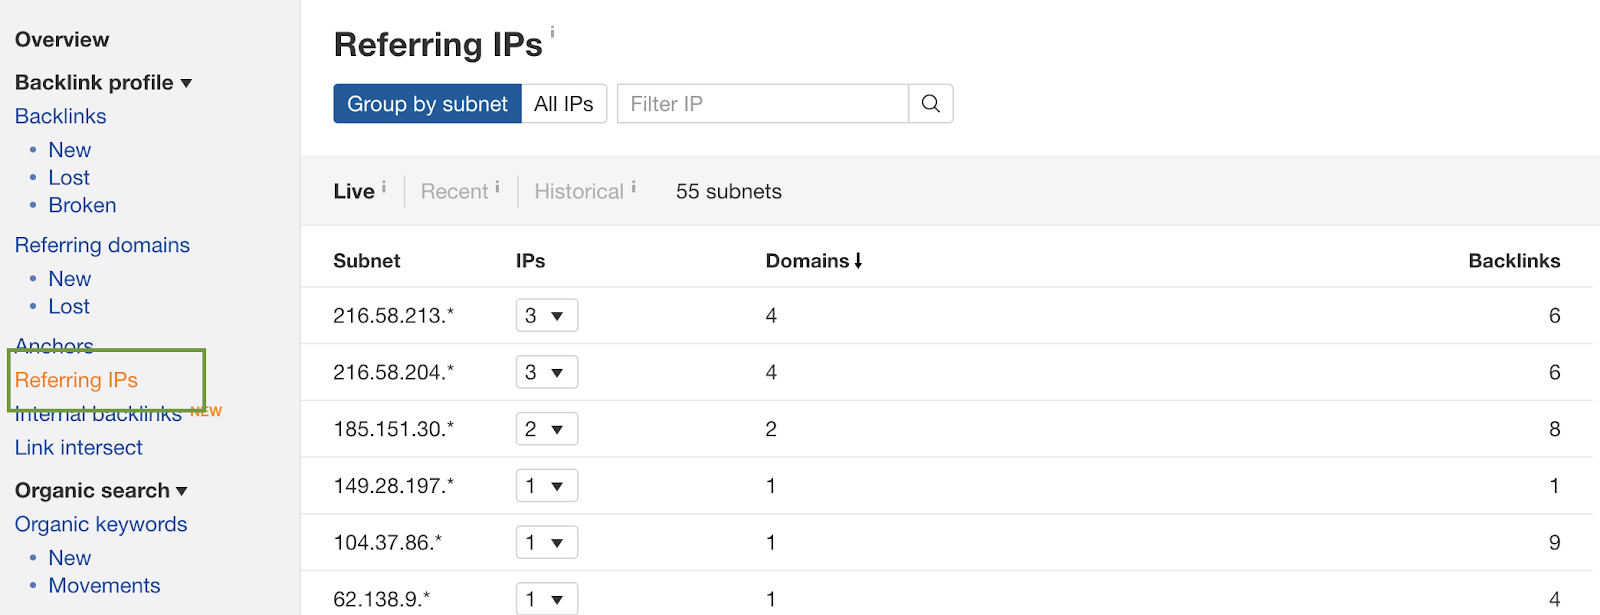 Ahrefs: Referring IPs can show the health of backlink profile